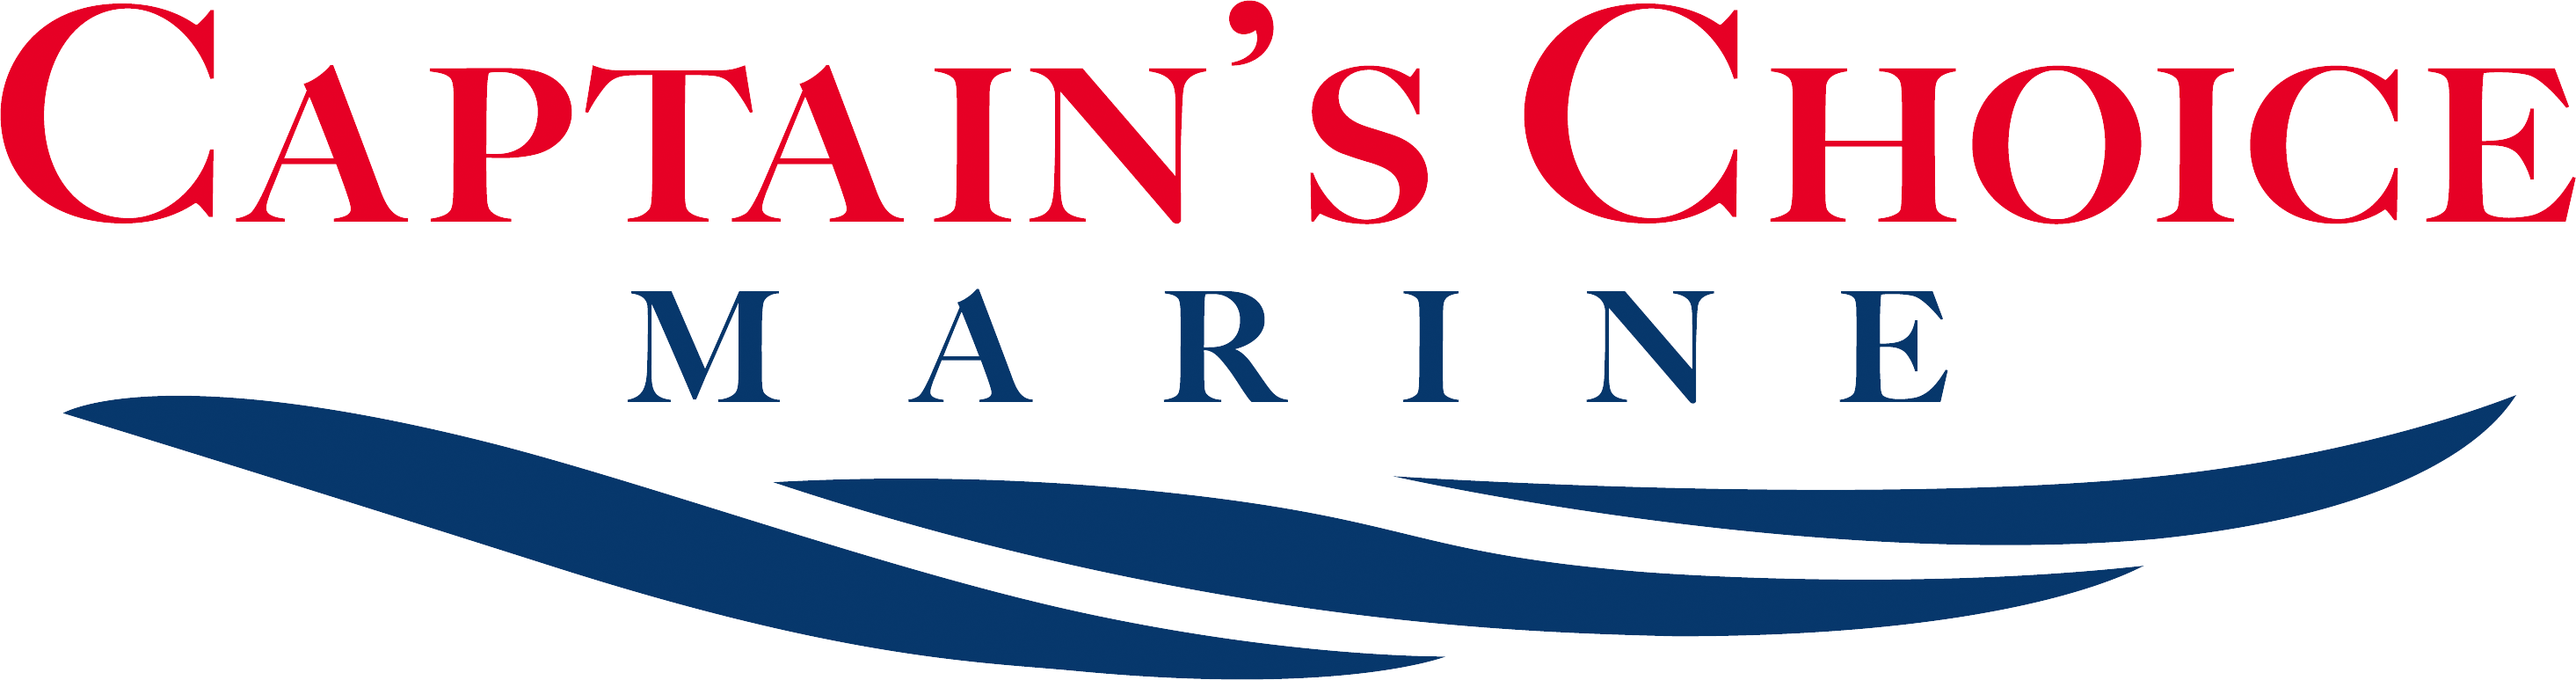 Web Accessibility - New & Used Boats for Sale - Captain's Choice Marine